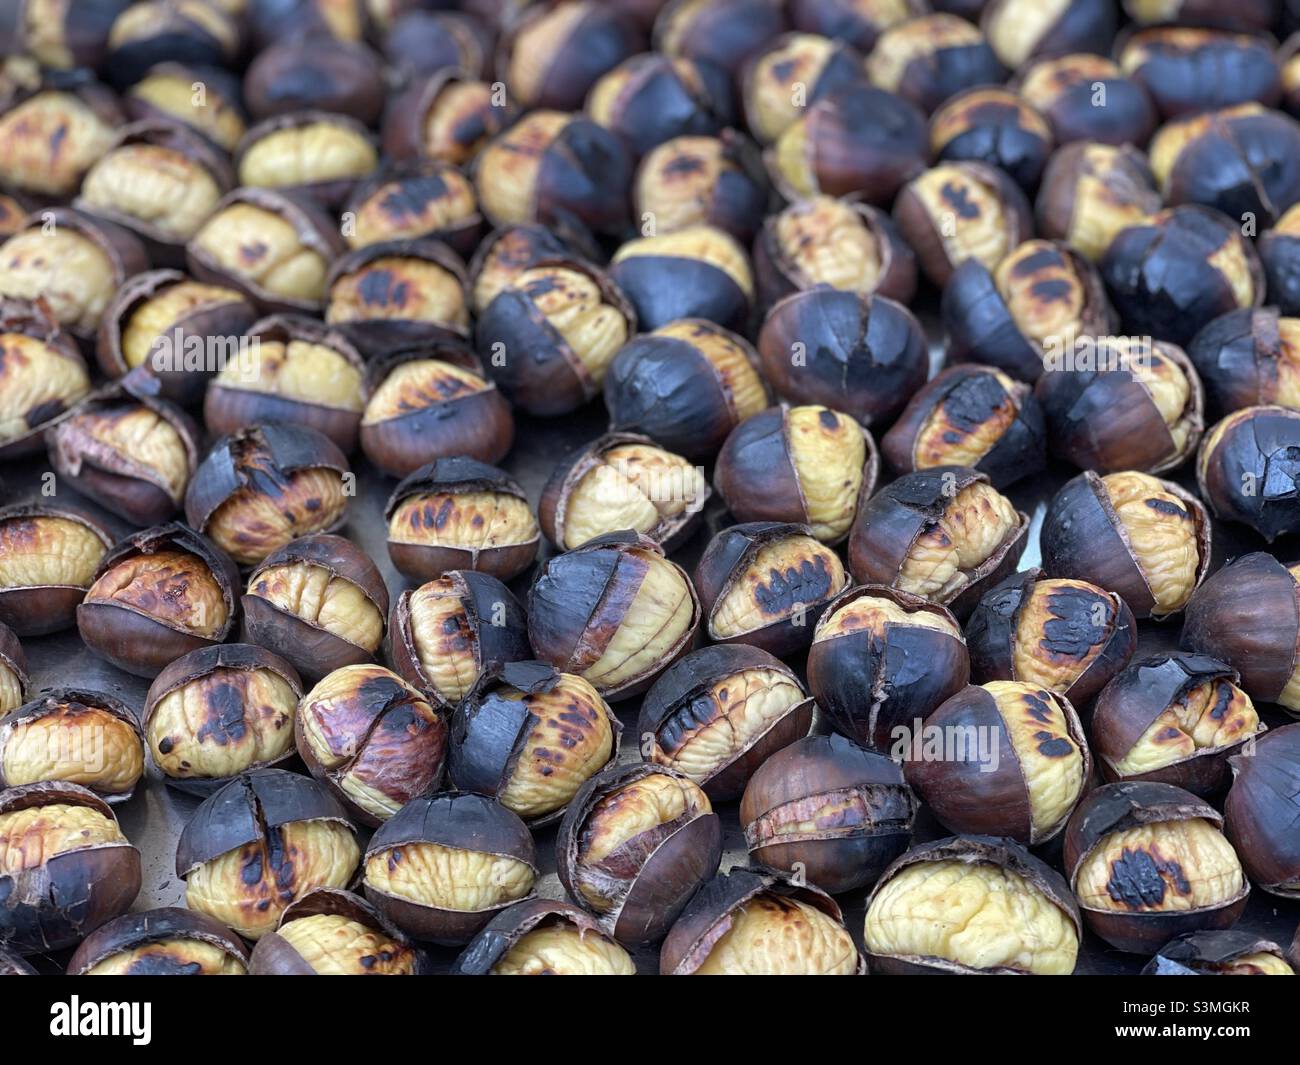 Many roasted chestnuts on a tray at a food market in Italy Stock Photo